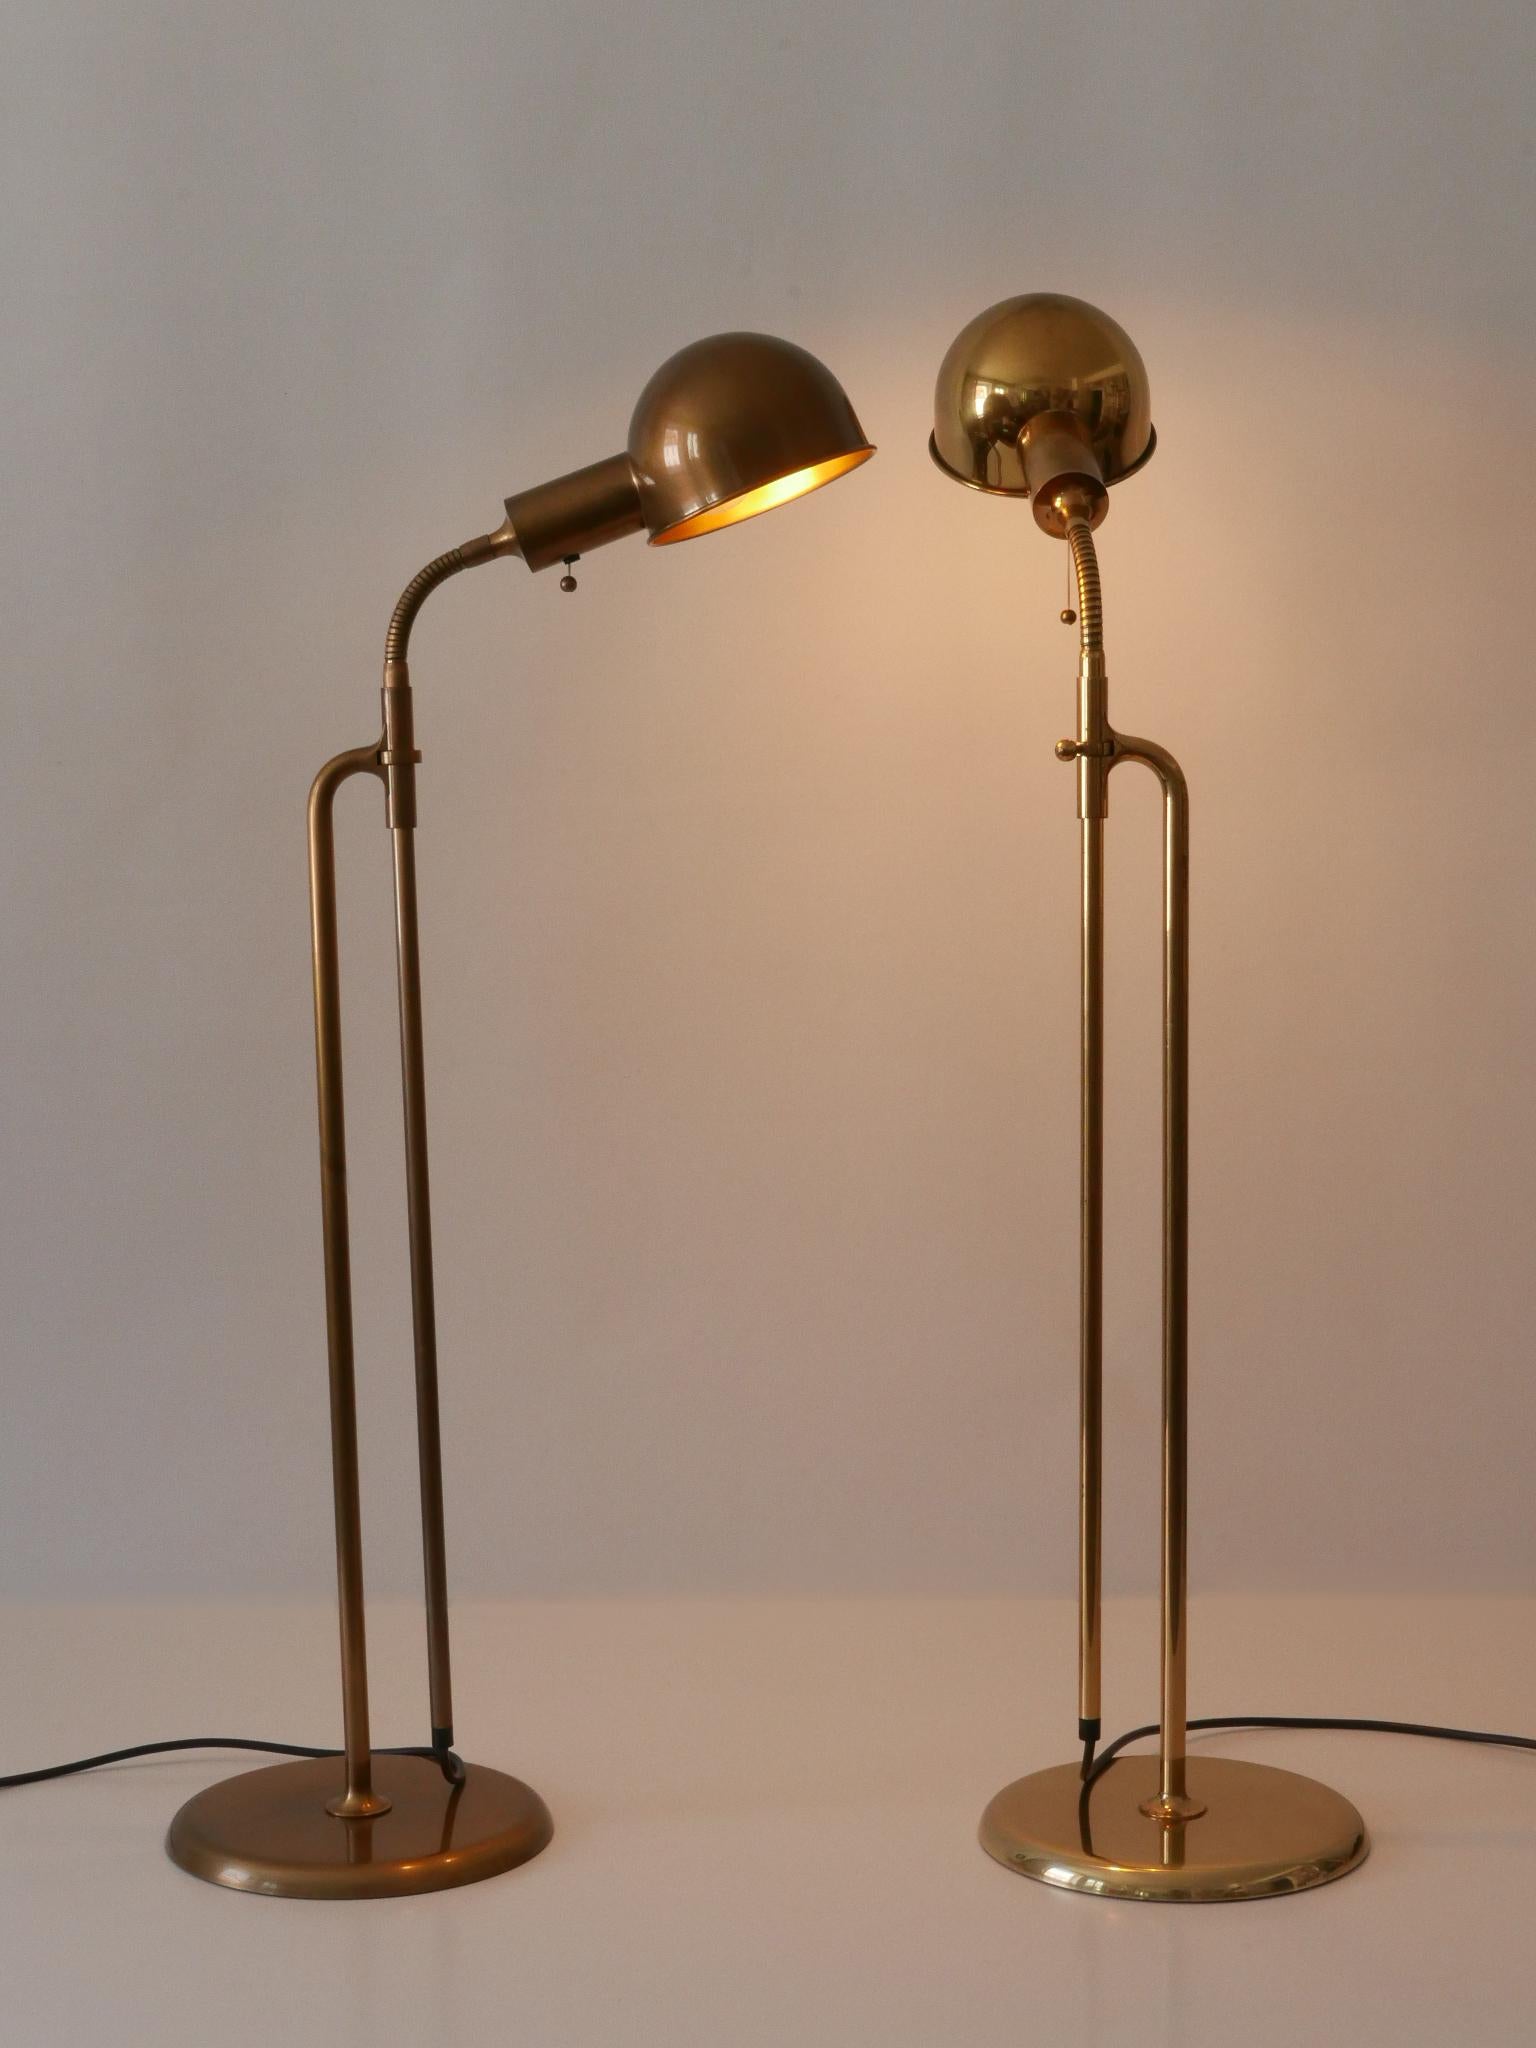 Set of Two Mid-Century Modern Reading Floor Lamps 'Bola' by Florian Schulz 1970s In Good Condition For Sale In Munich, DE